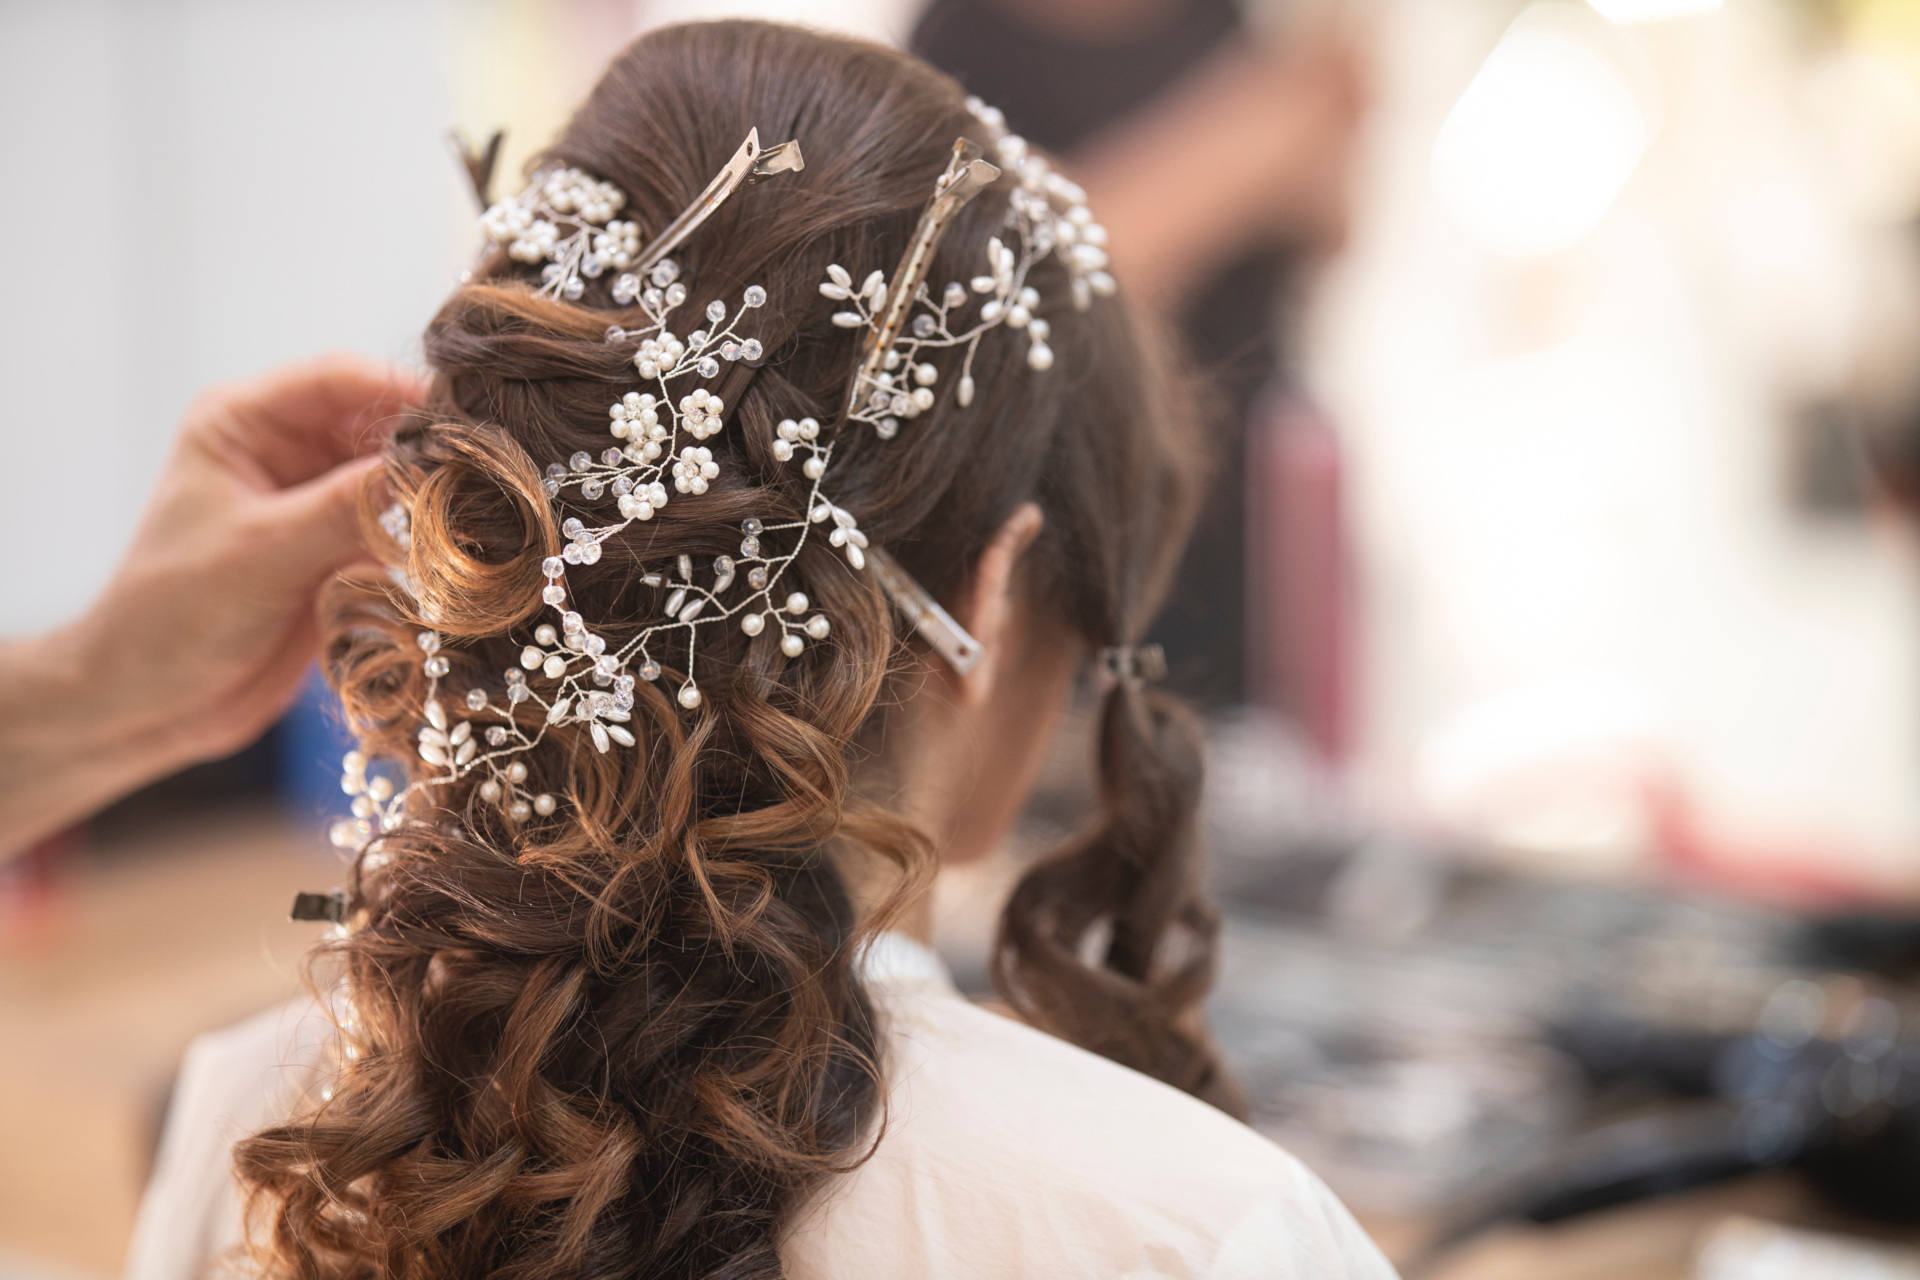 Bridal Bun Hairstyles that are extremely easy to carry for your wedding day